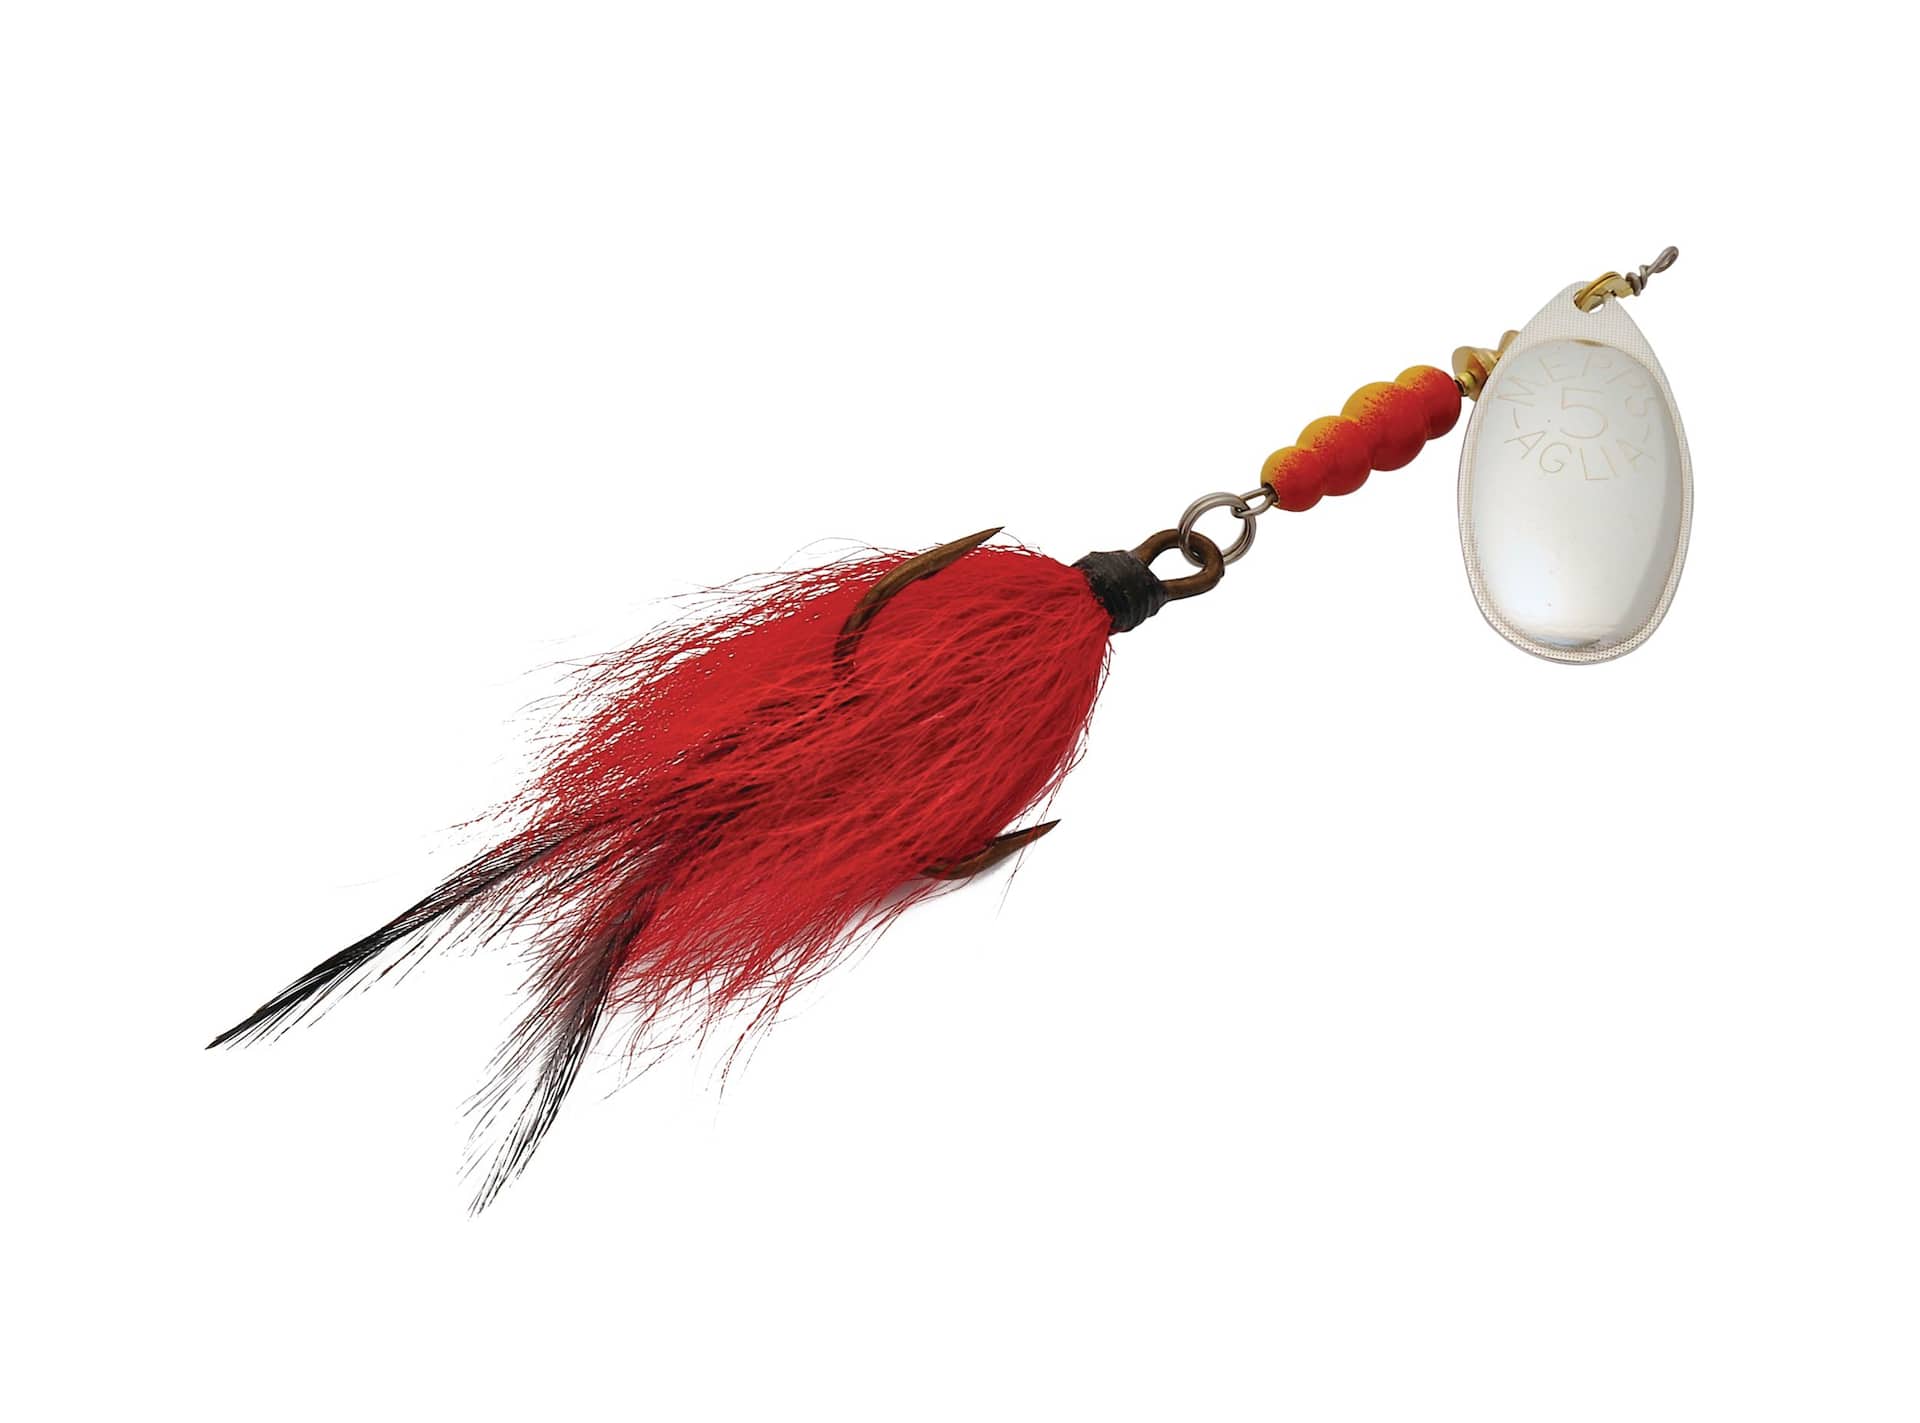 Bucktail Dressed Treble Hook Set Squirrel Tail Feather Fishing